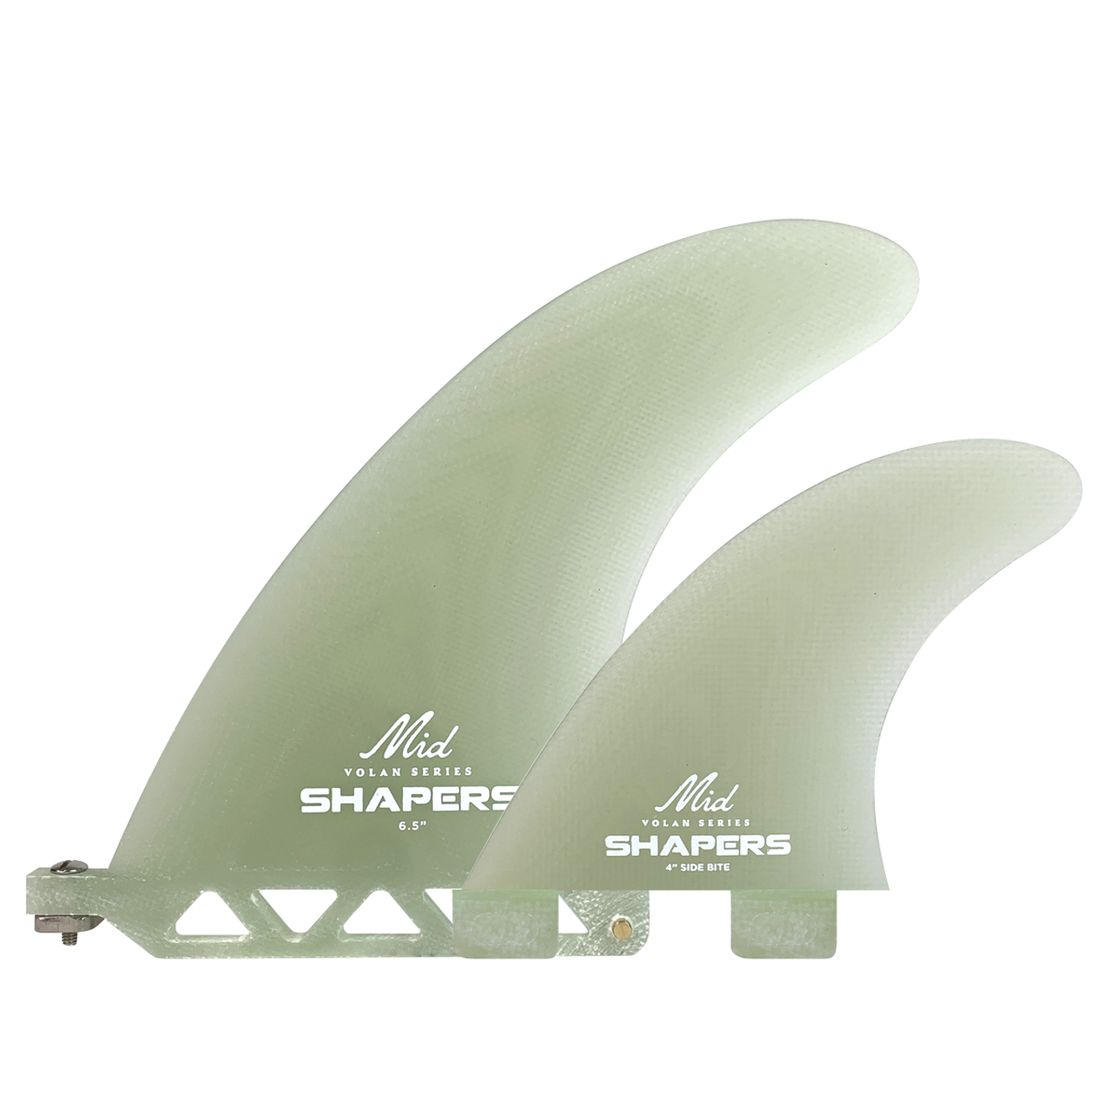 Shapers Fins - 2+1, 6.5" Volan + 4" Sides(Dual Tab)